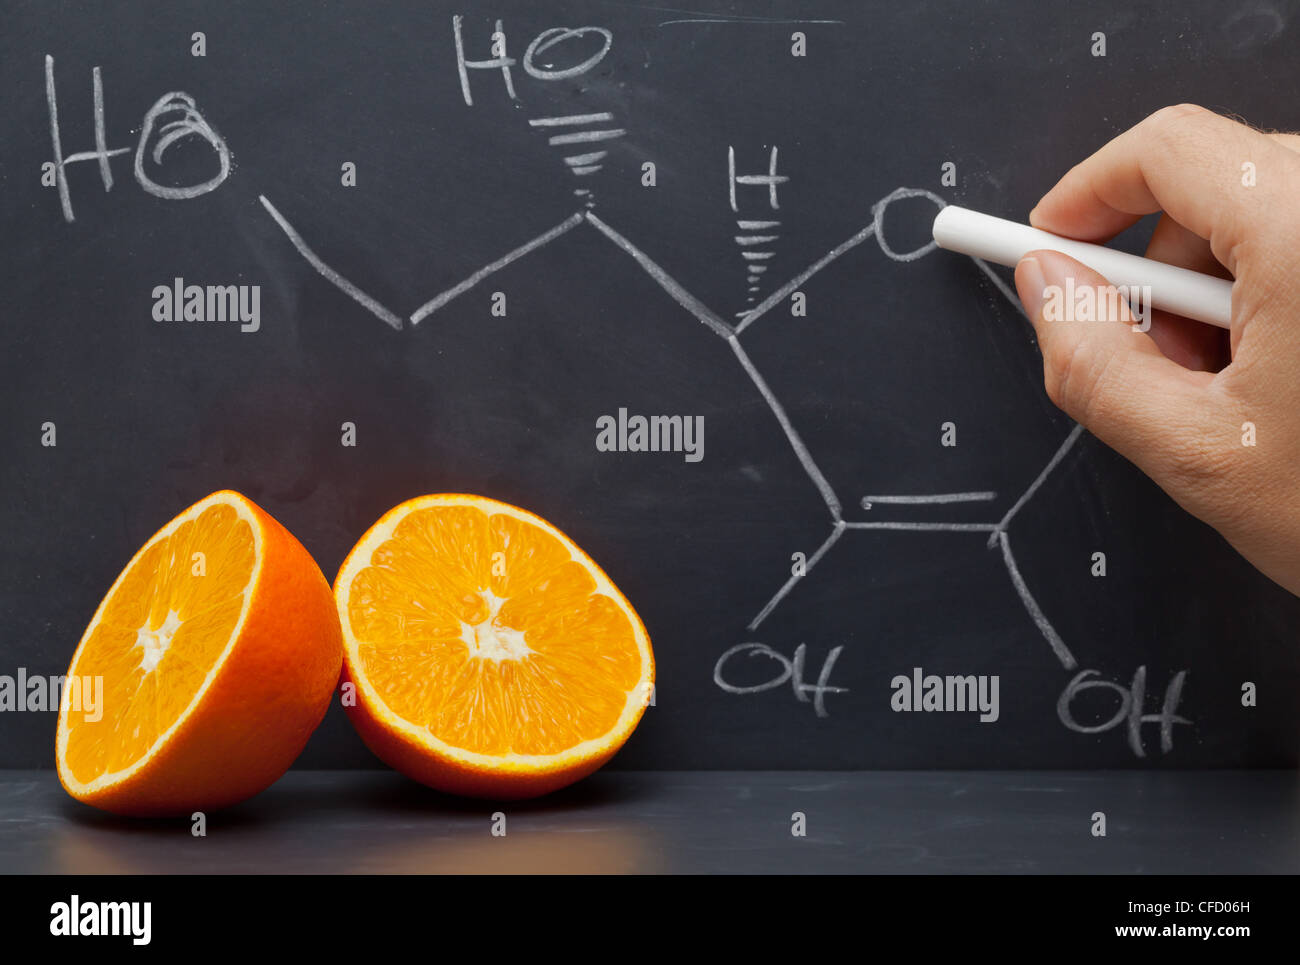 Hand drawing structural formula of vitamin C on blackboard with oranges in front Stock Photo